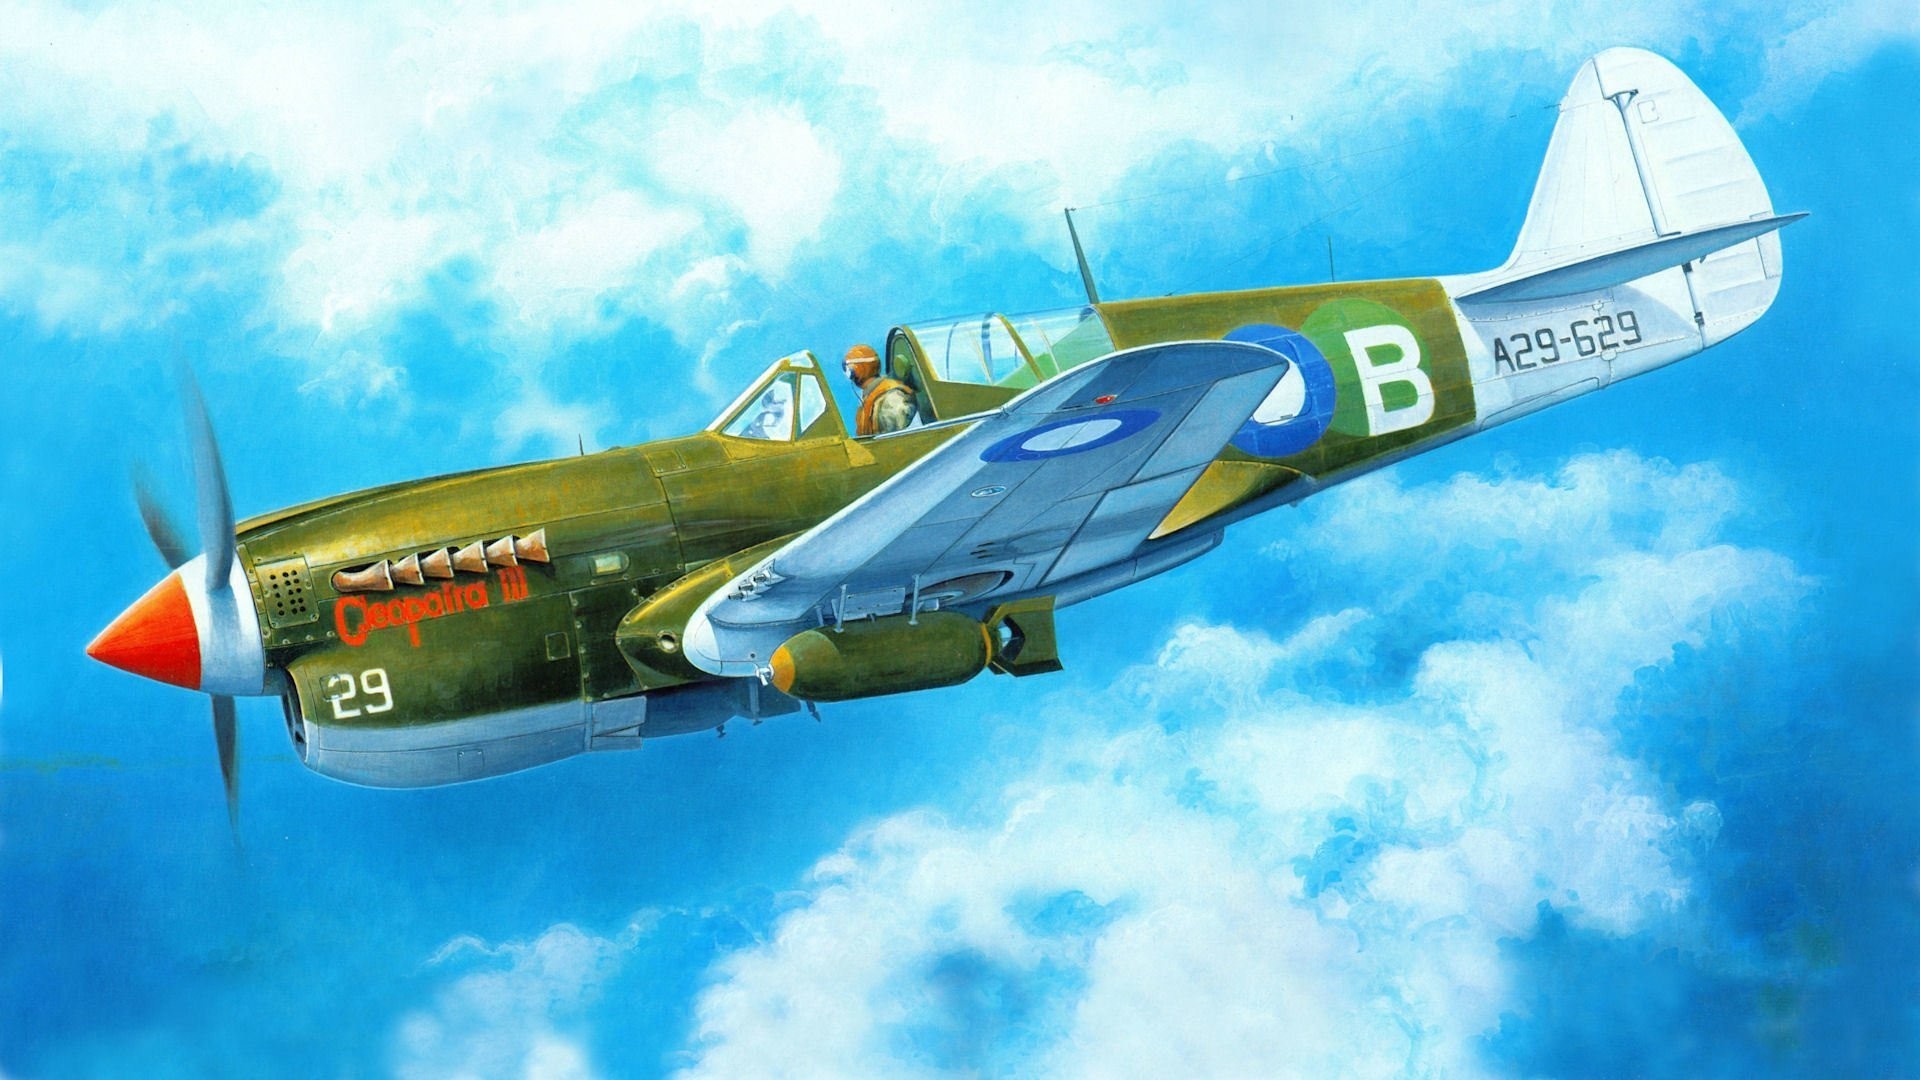 1920x1080  Ww2 Airplane Wallpaper Images)